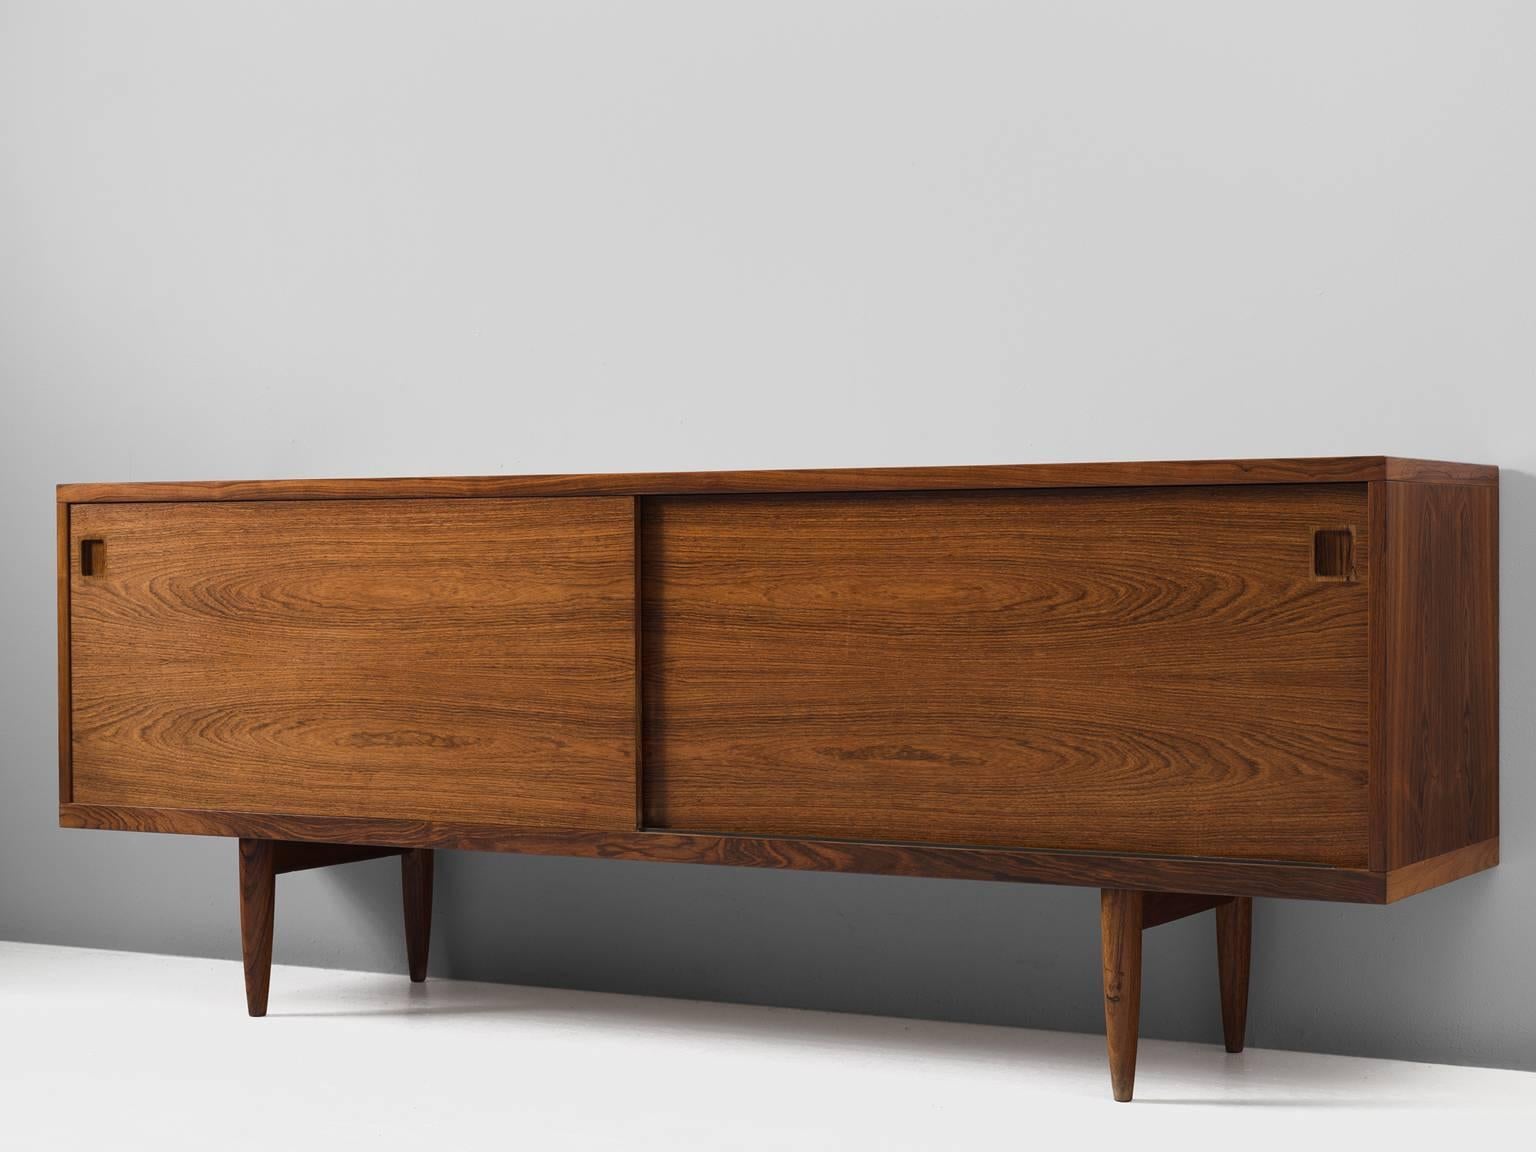 Credenza, rosewood, by J.L Møllers Møbelfabrik, Denmark, 1960s.

This lovely medium-sized sideboard is a Classic example of the craftsmanship of Danish midmodern design. At the same time, it Stand for the Scandinavian postwar vision of practical